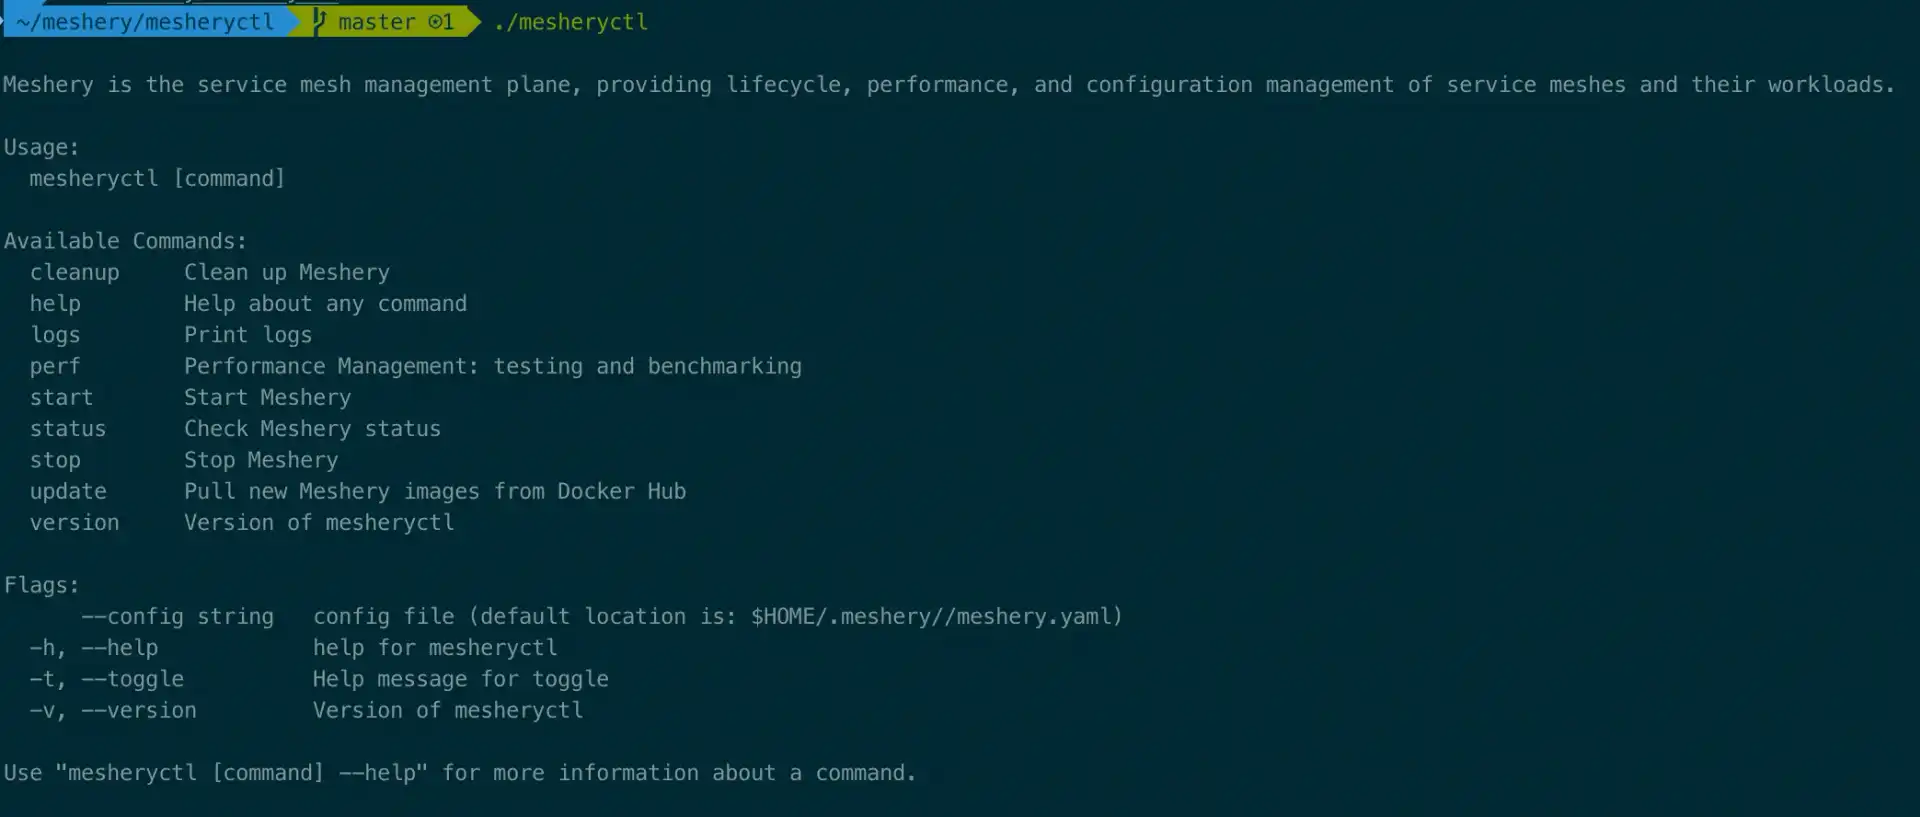 Getting started with mesheryctl